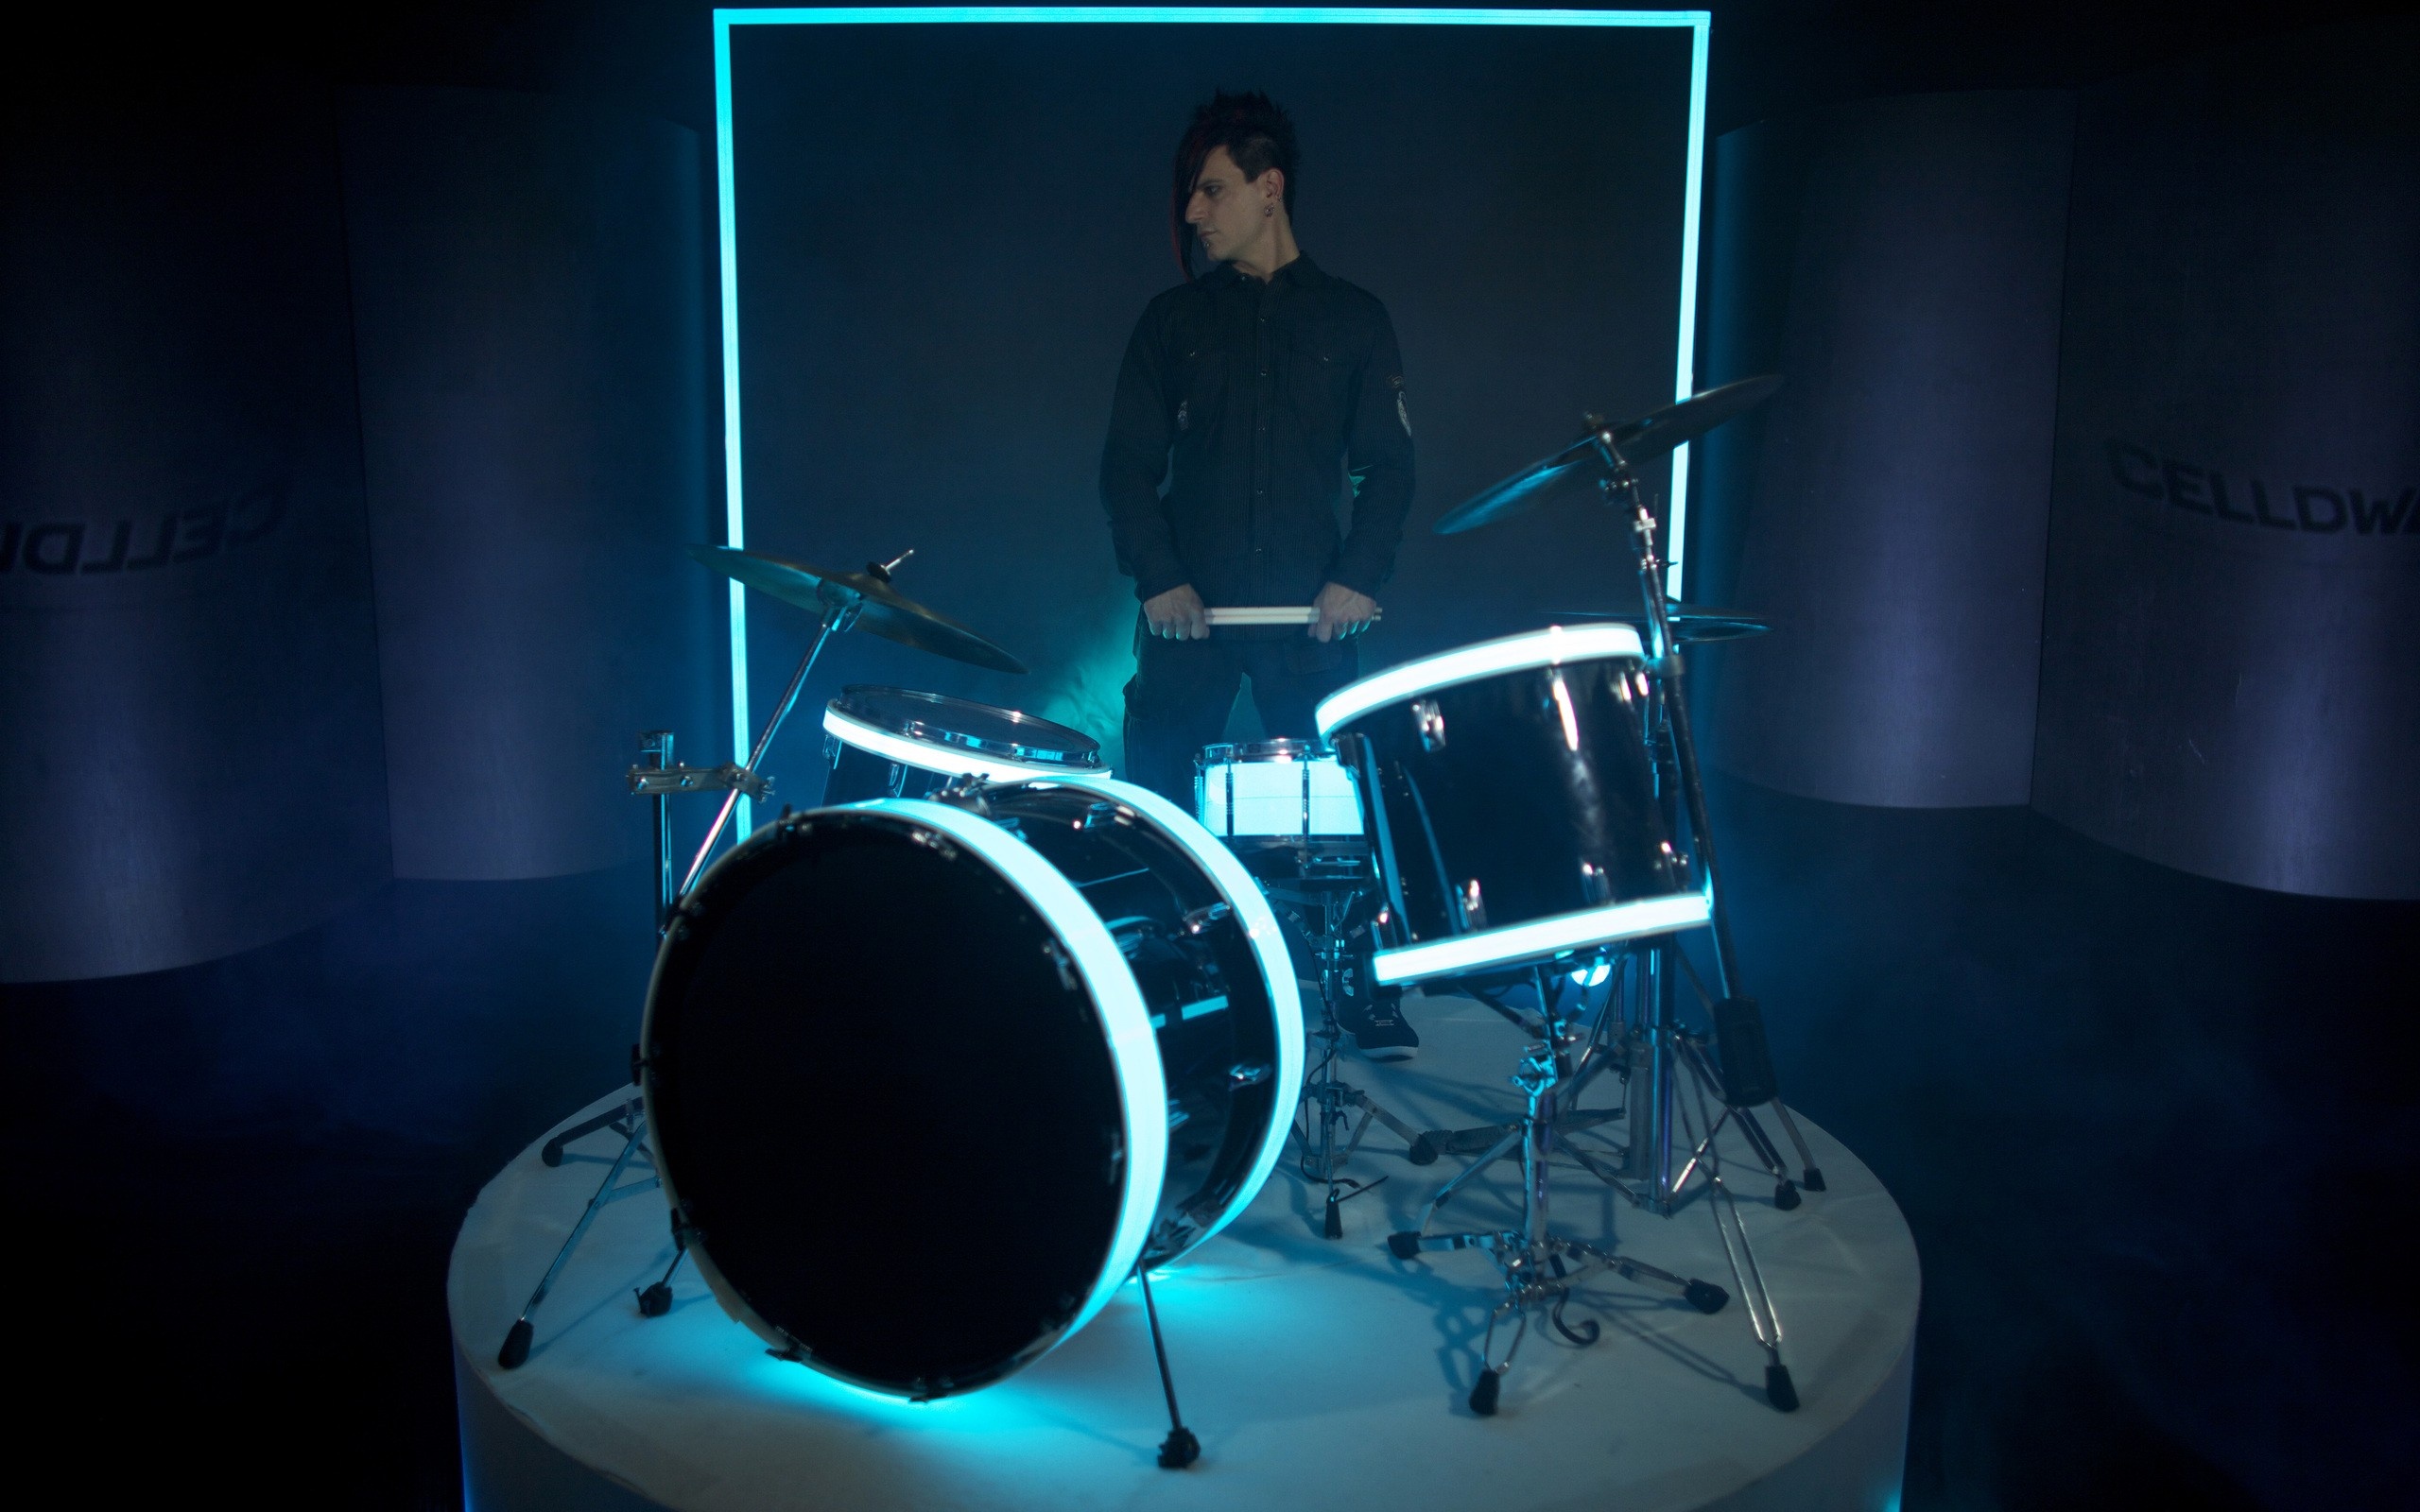 Bass Drum: A drummer, Drum kit basic configuration, The band on the stage, Concert lighting. 2560x1600 HD Wallpaper.